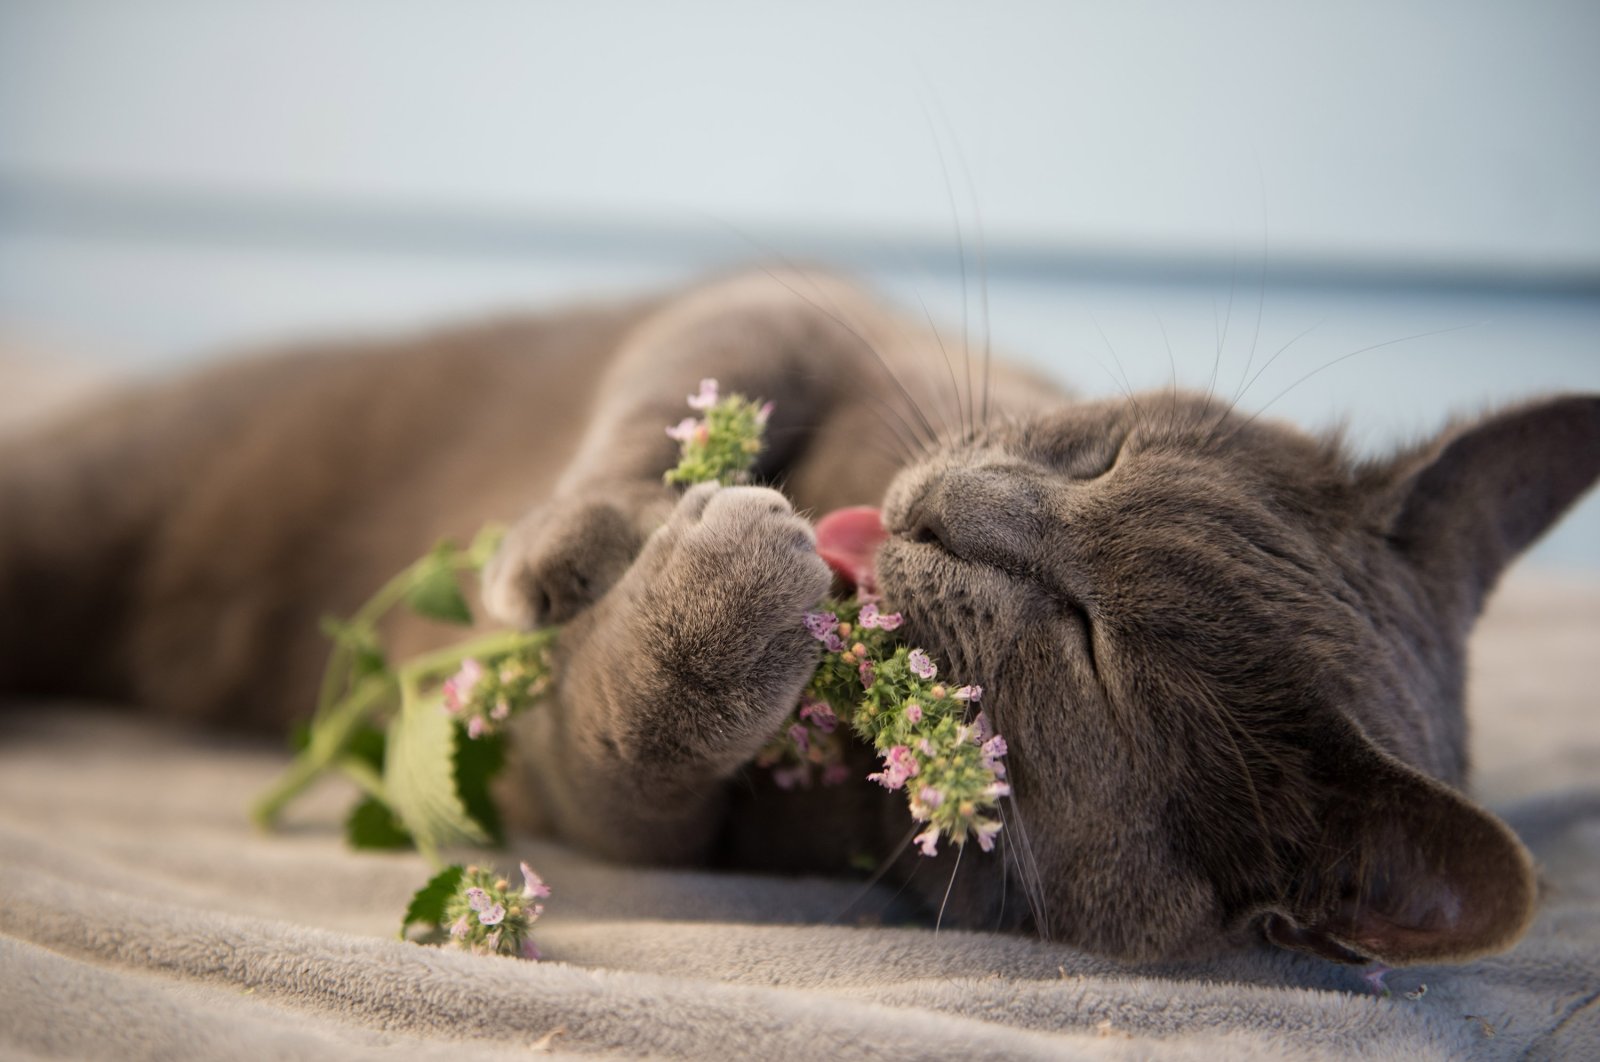 A gray cat responds to catnip in a playful mood. (Shutterstock Photo)